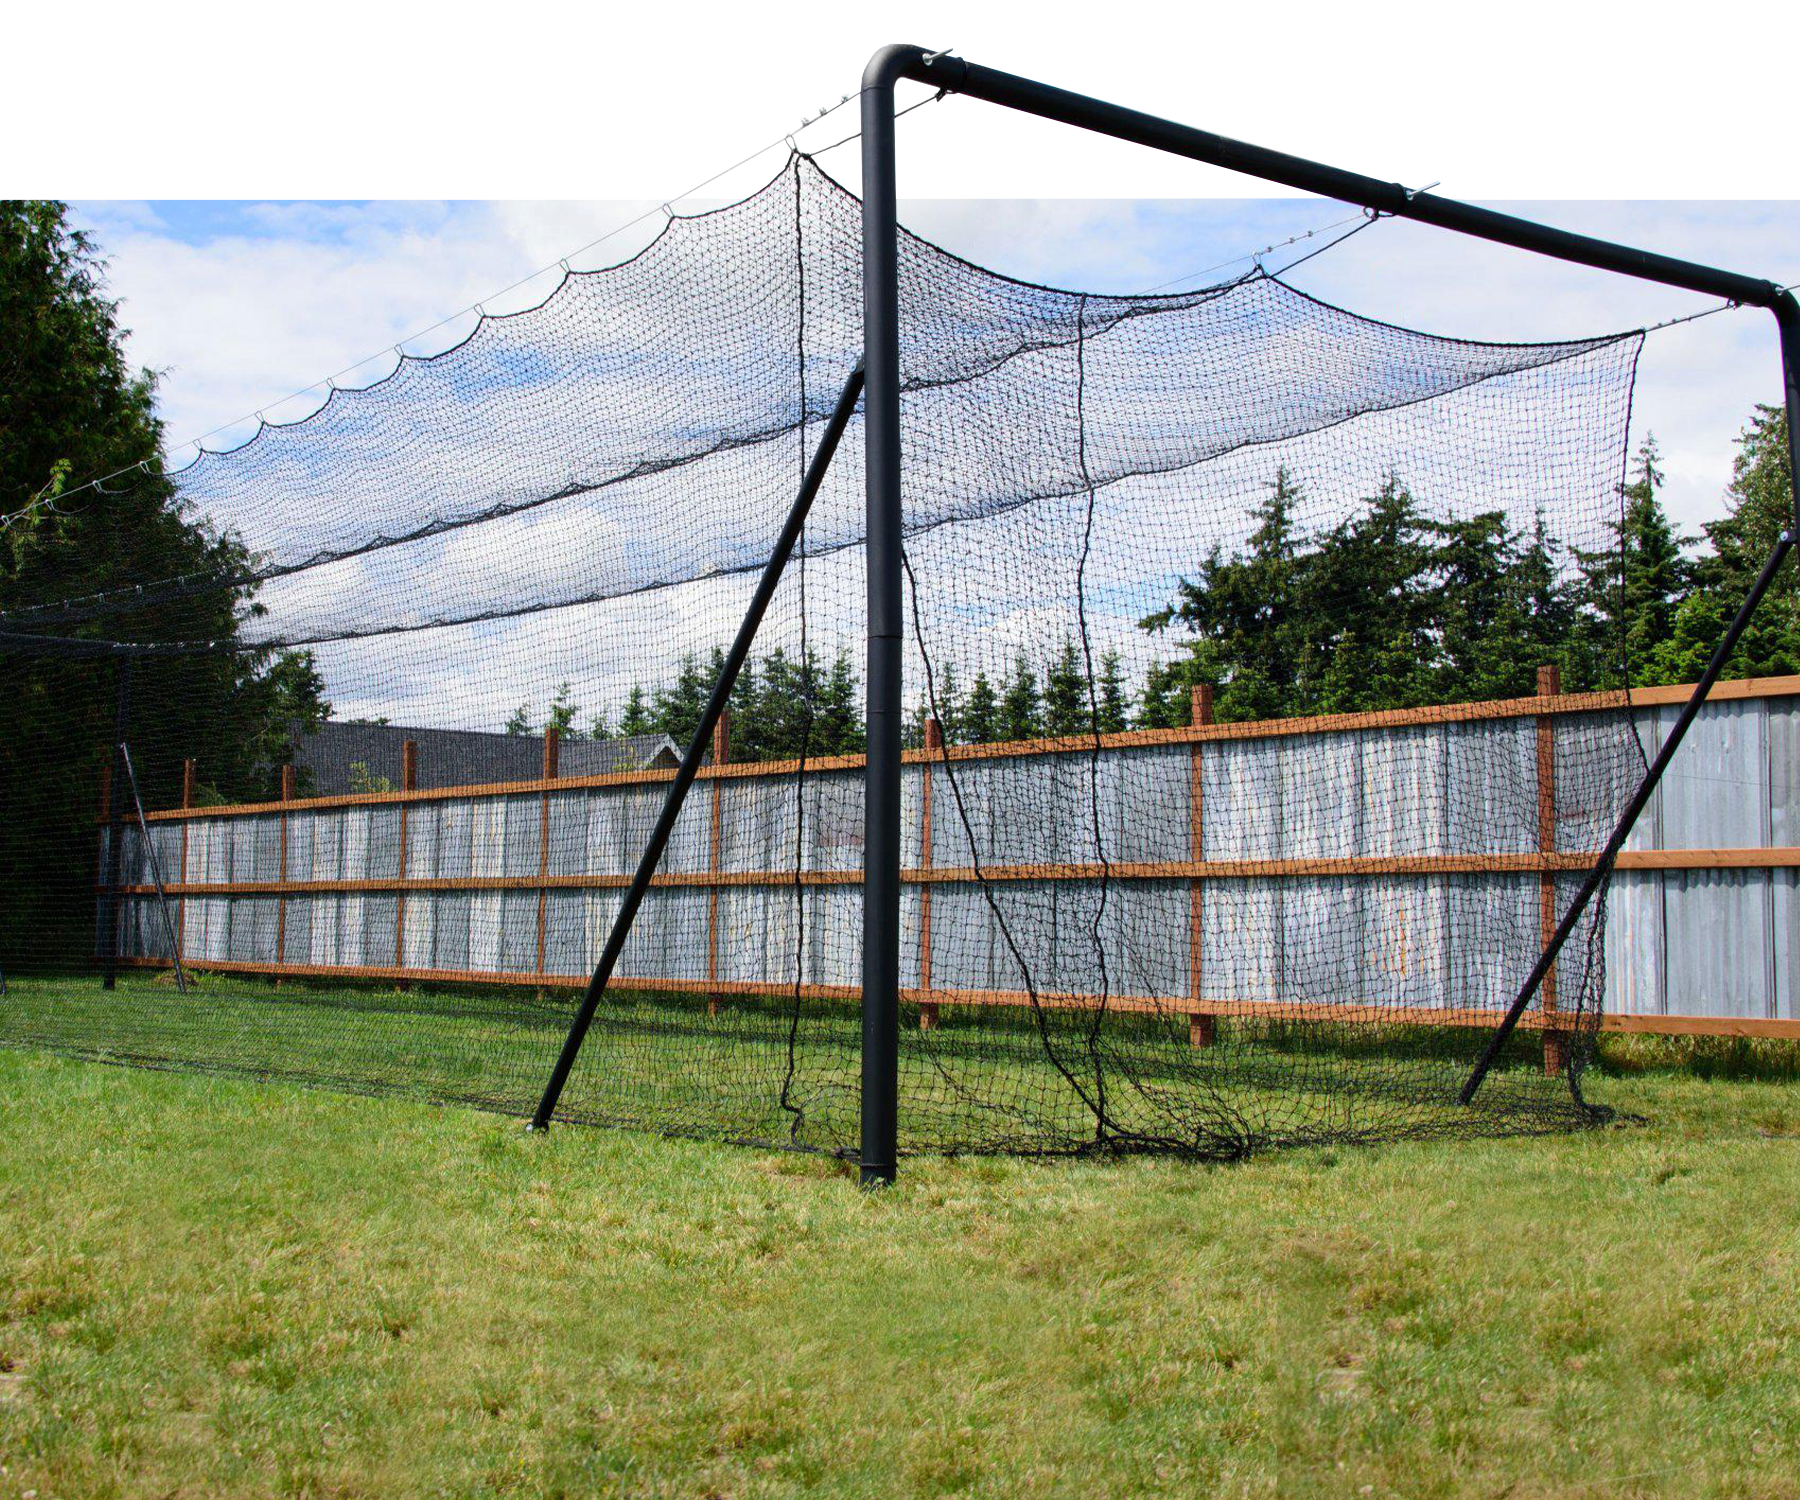 Iron Horse batting cage in backyard with fence, grass, trees, and blue skies